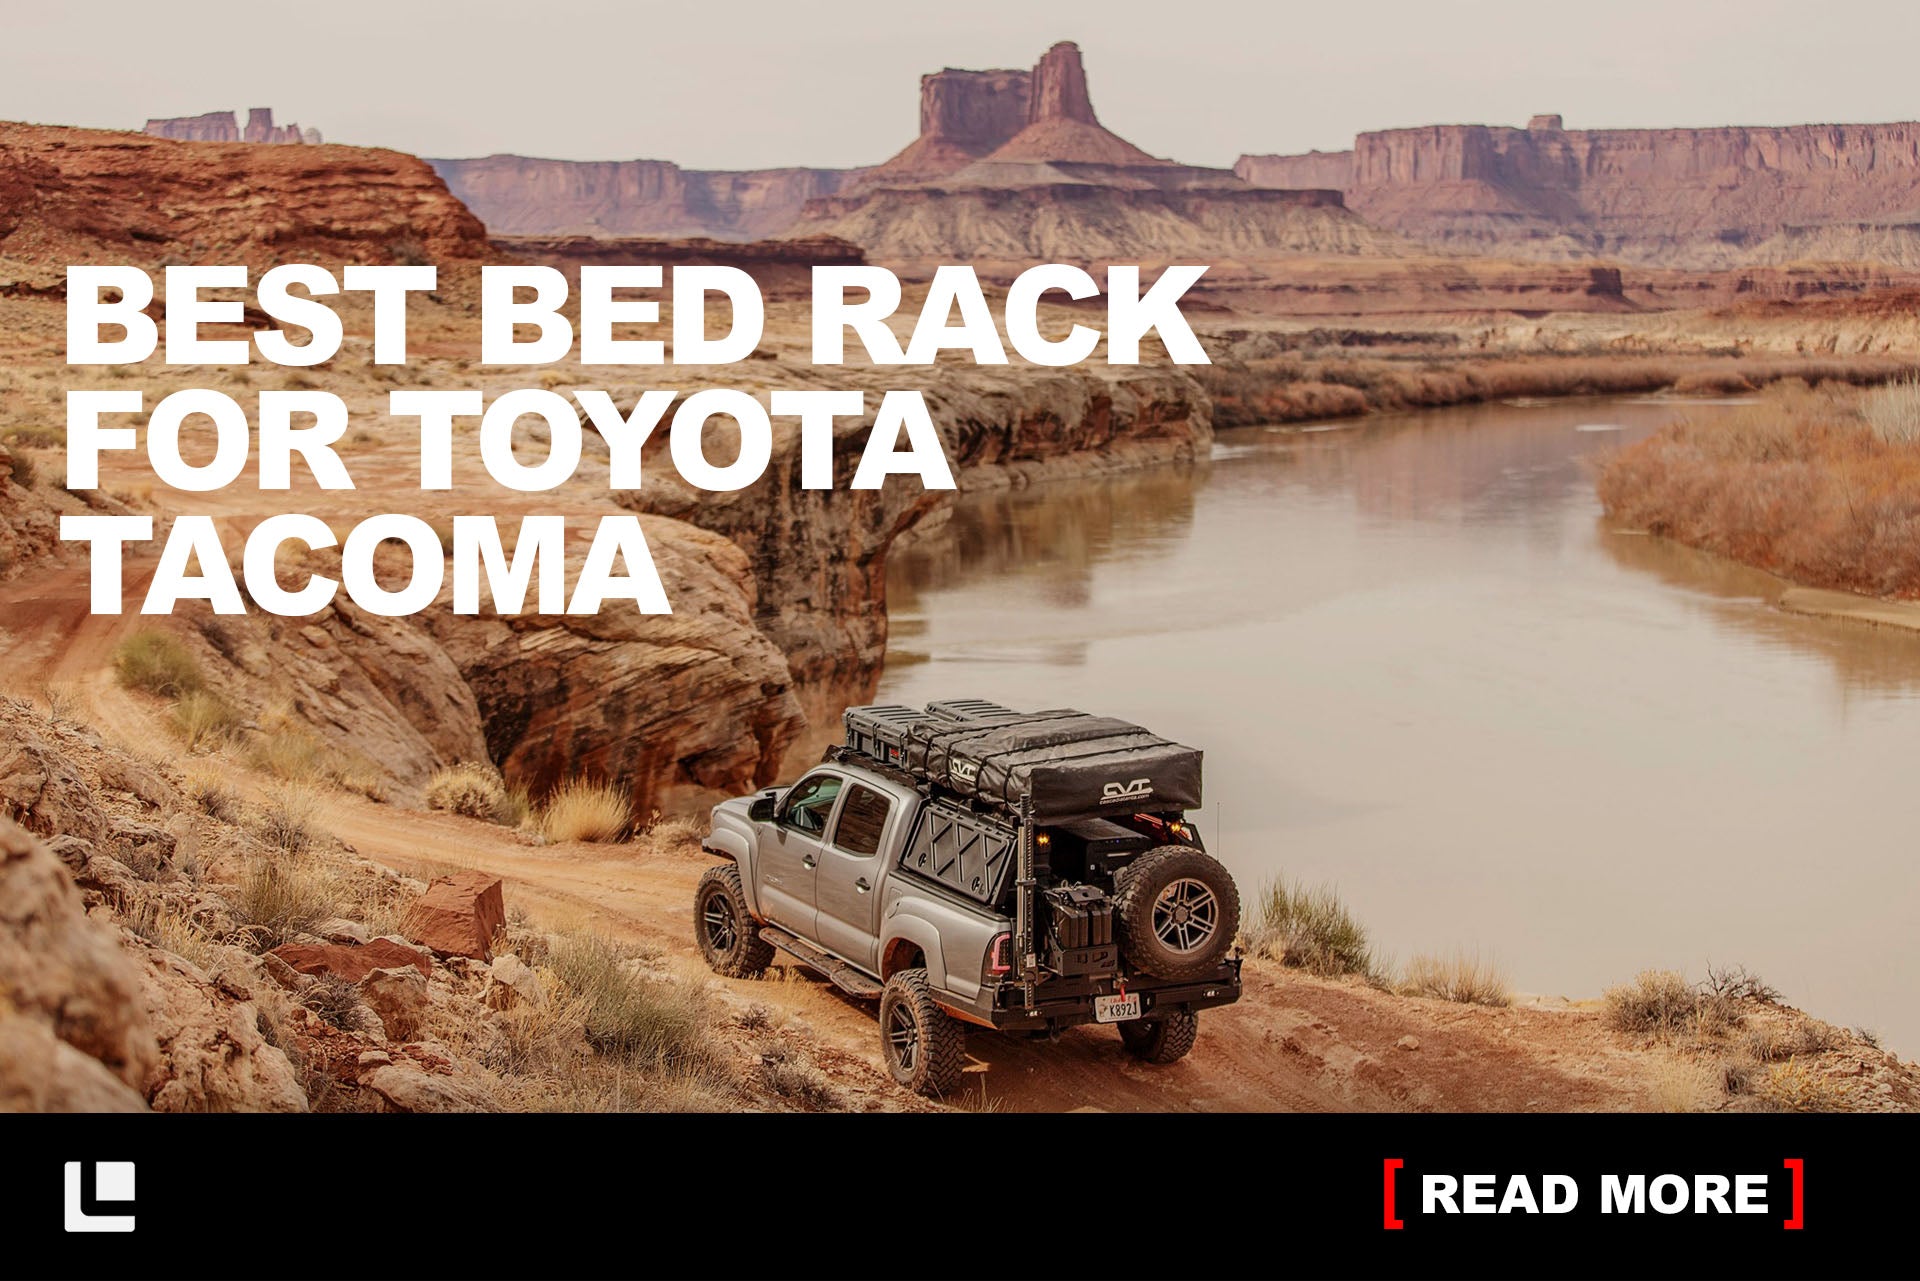 Best Bed Rack for Toyota Tacoma